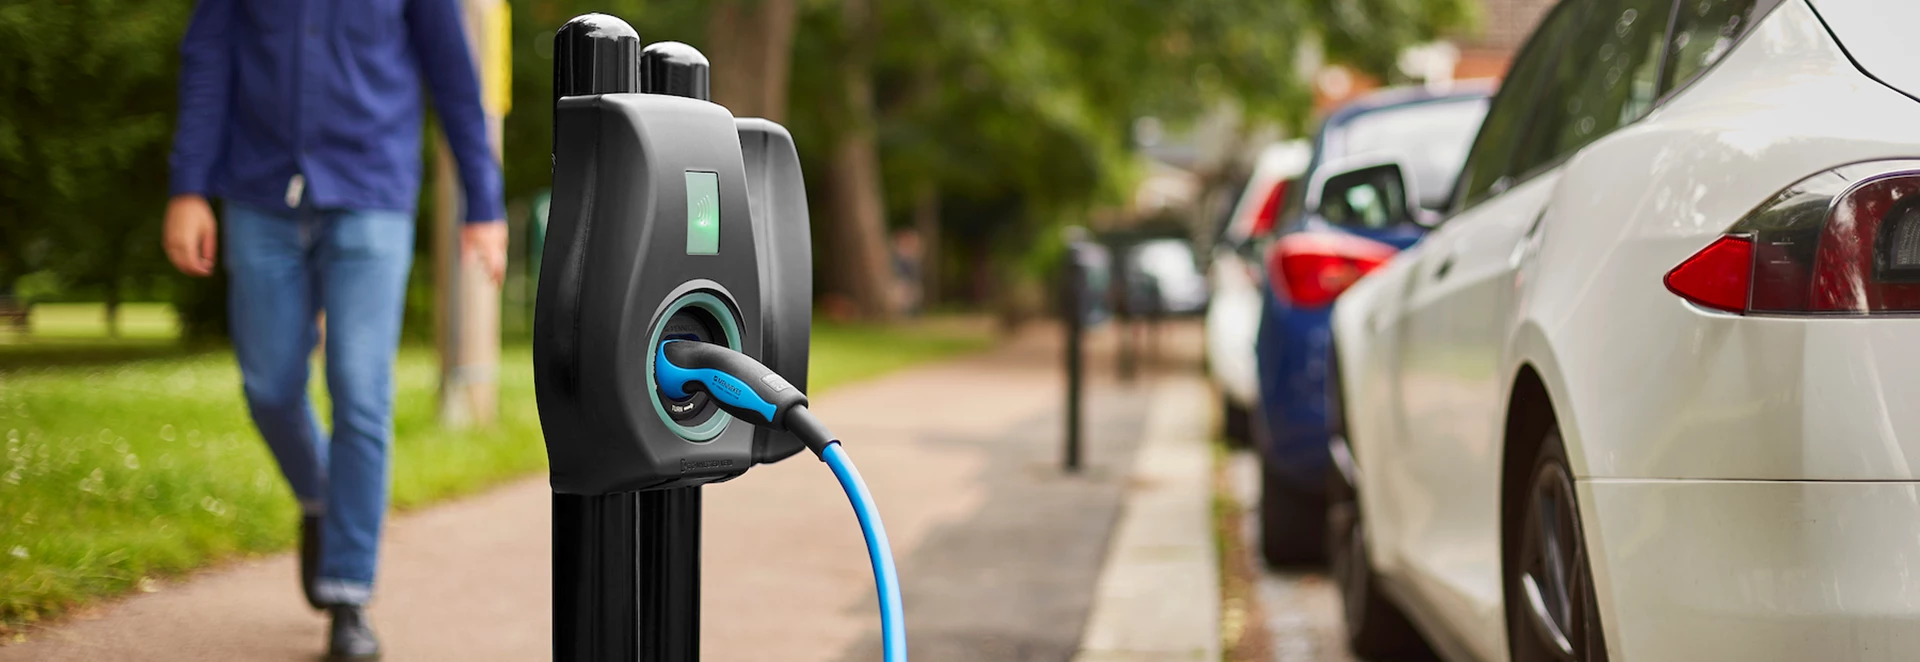 Streetside EV charging firm to install 190,000 units by 2030 